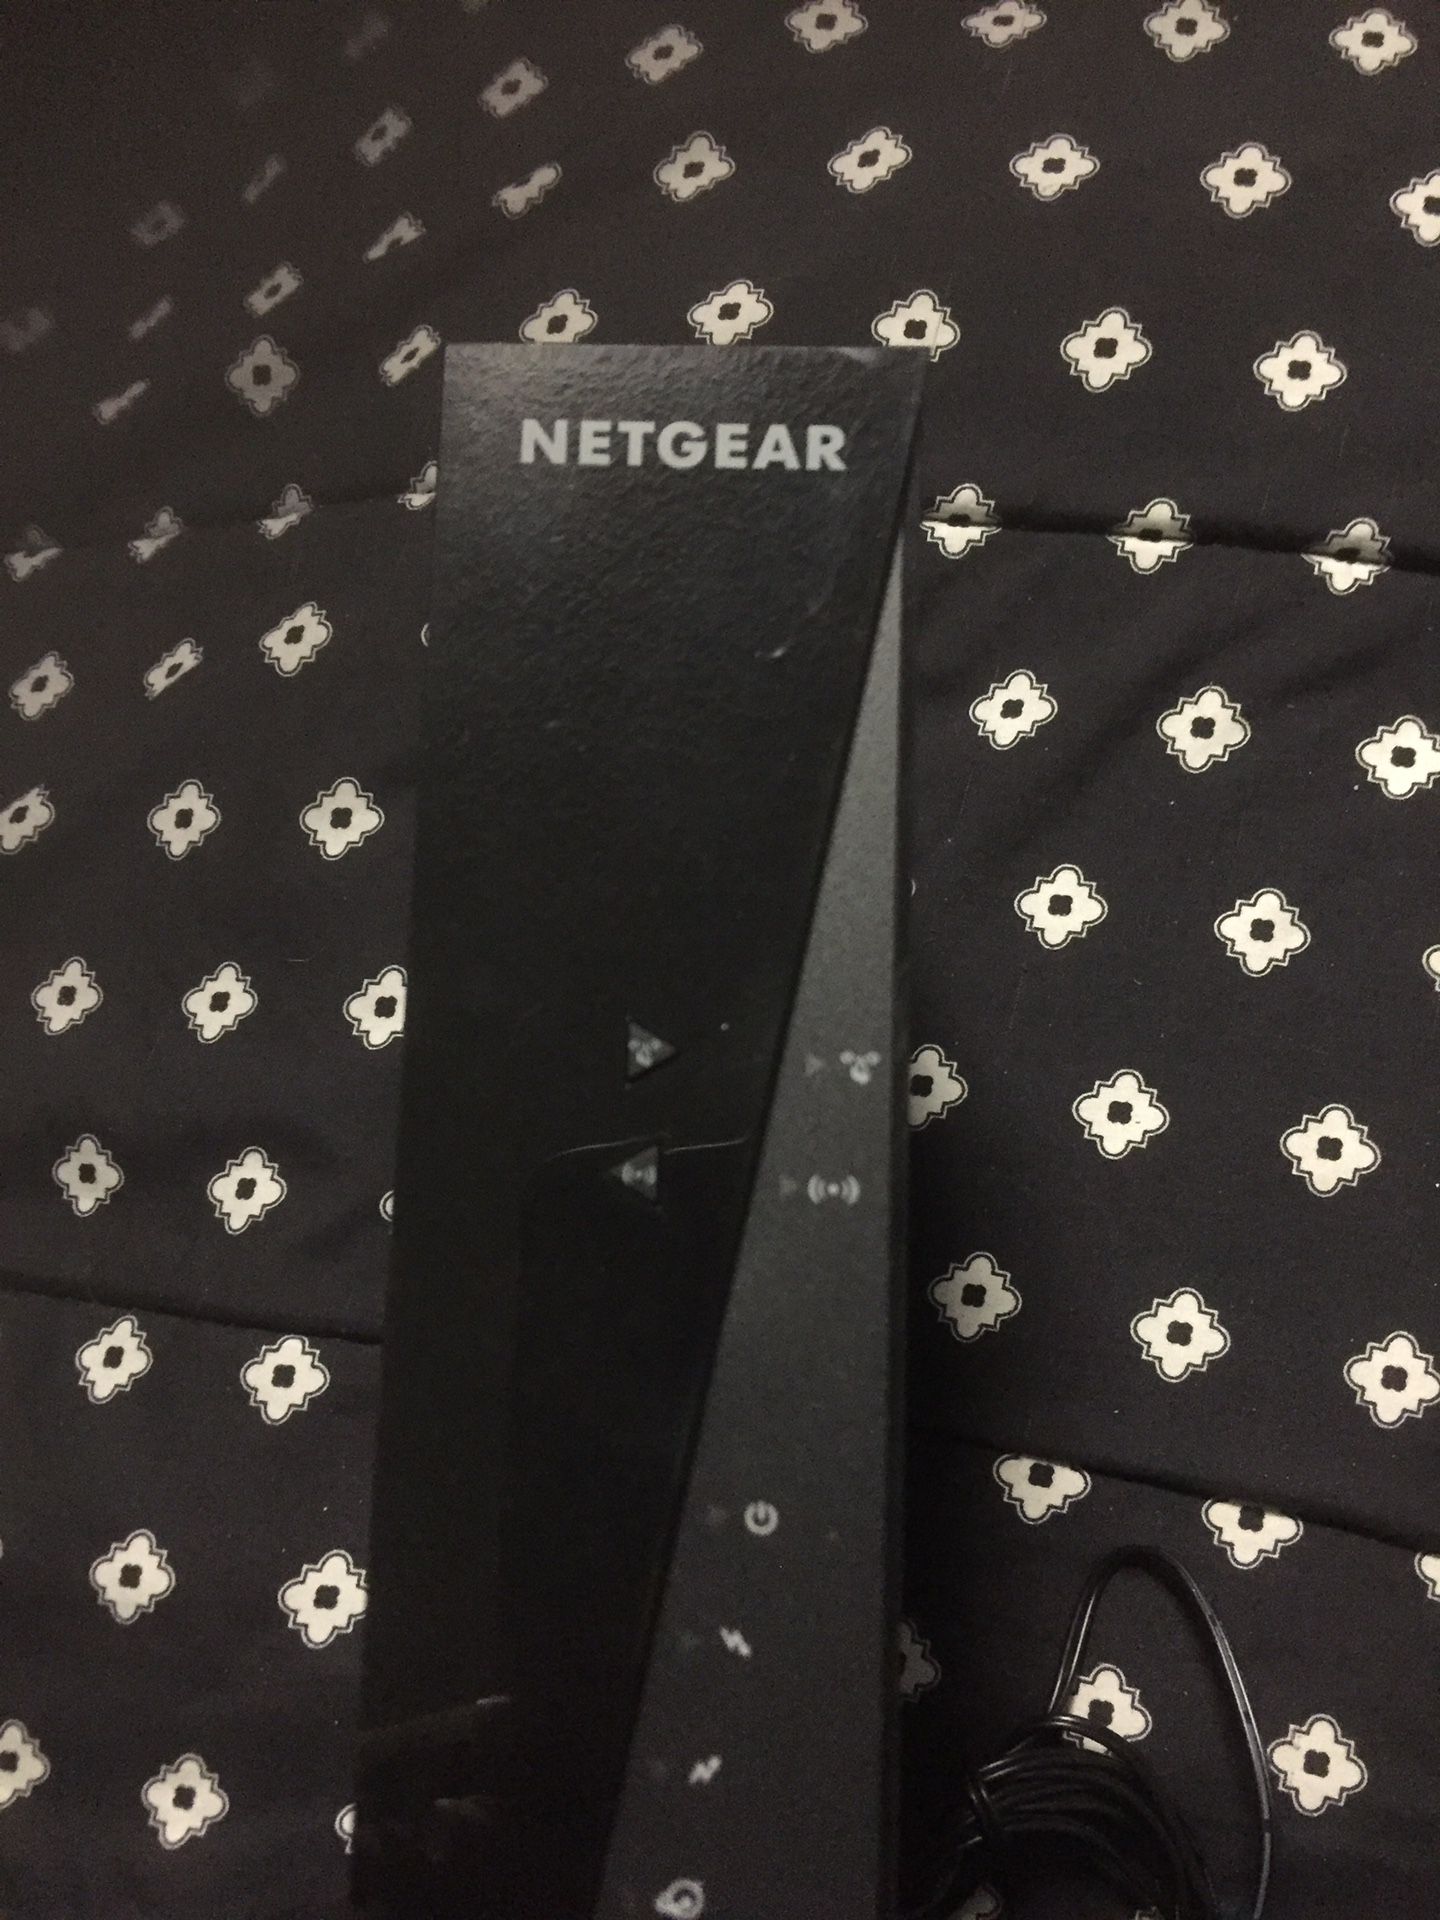 Netgear router n modem works great has power cable